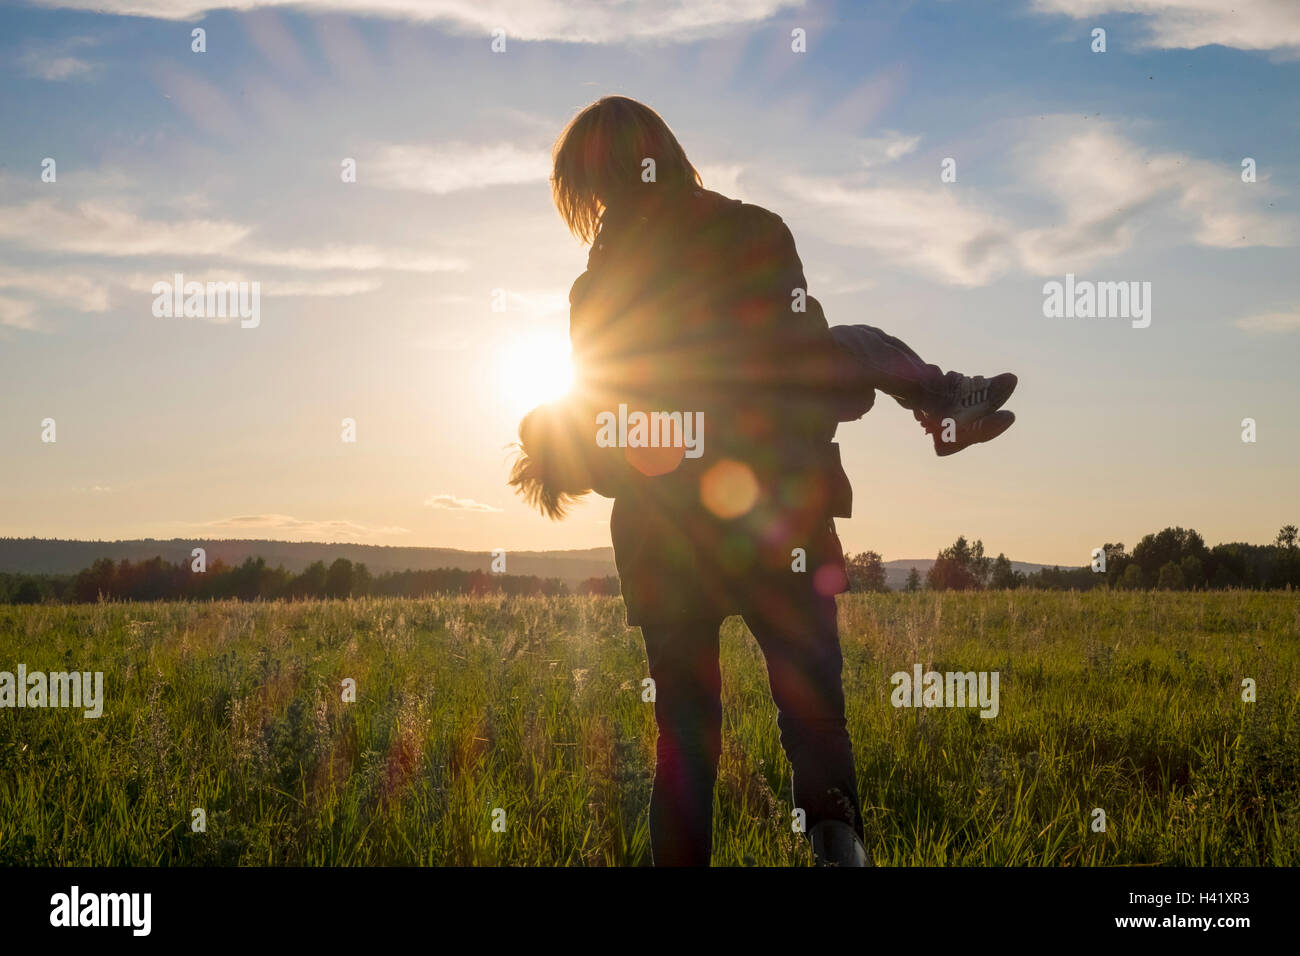 Woman carrying son in field at sunset Stock Photo